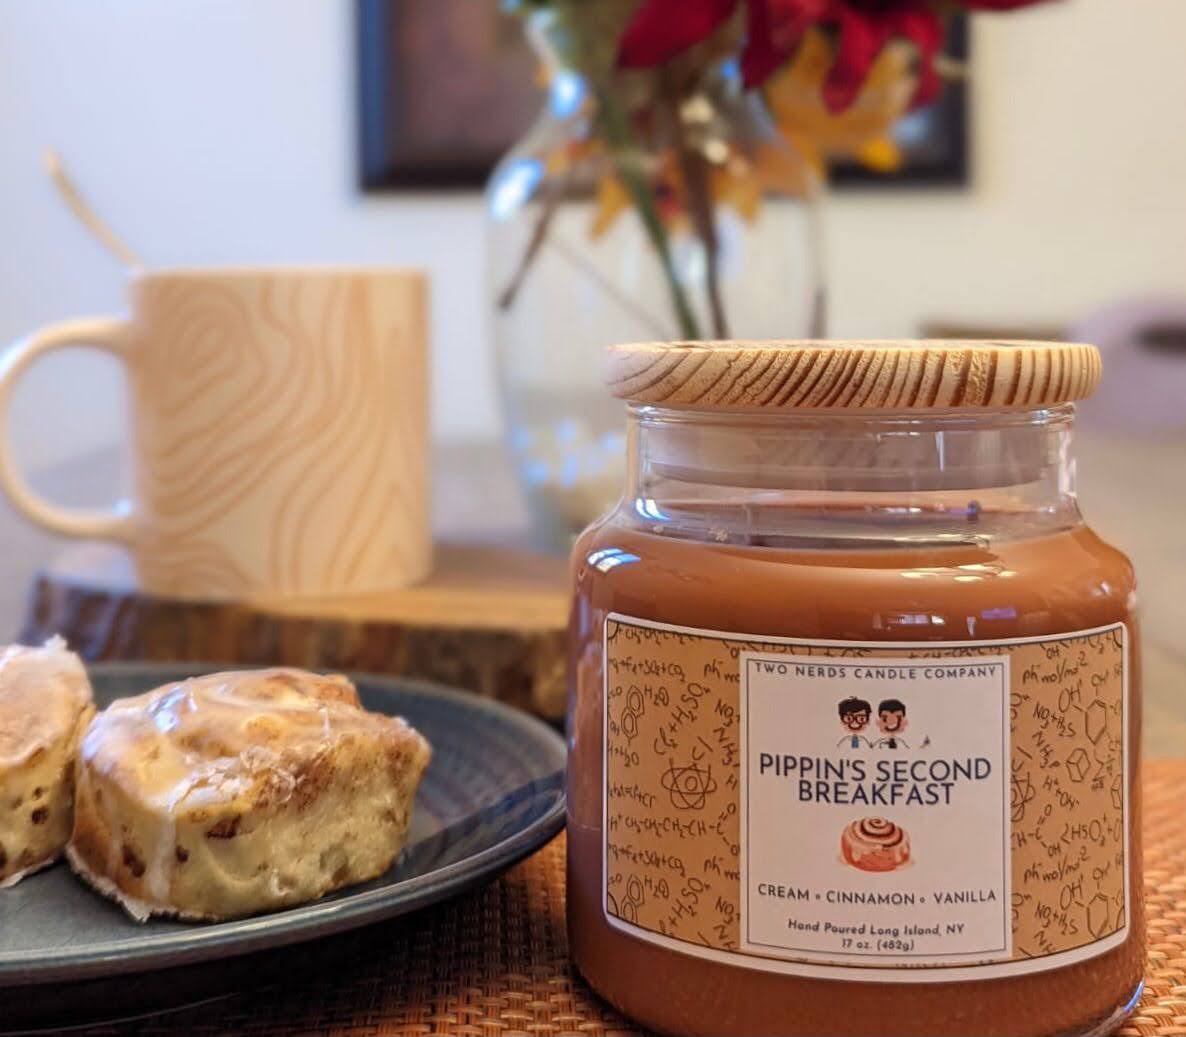 A brown soy candle themed after the Lord of the Rings which is a vanilla cinnamon scented with a cinnamon roll and coffee roll in the photograph.